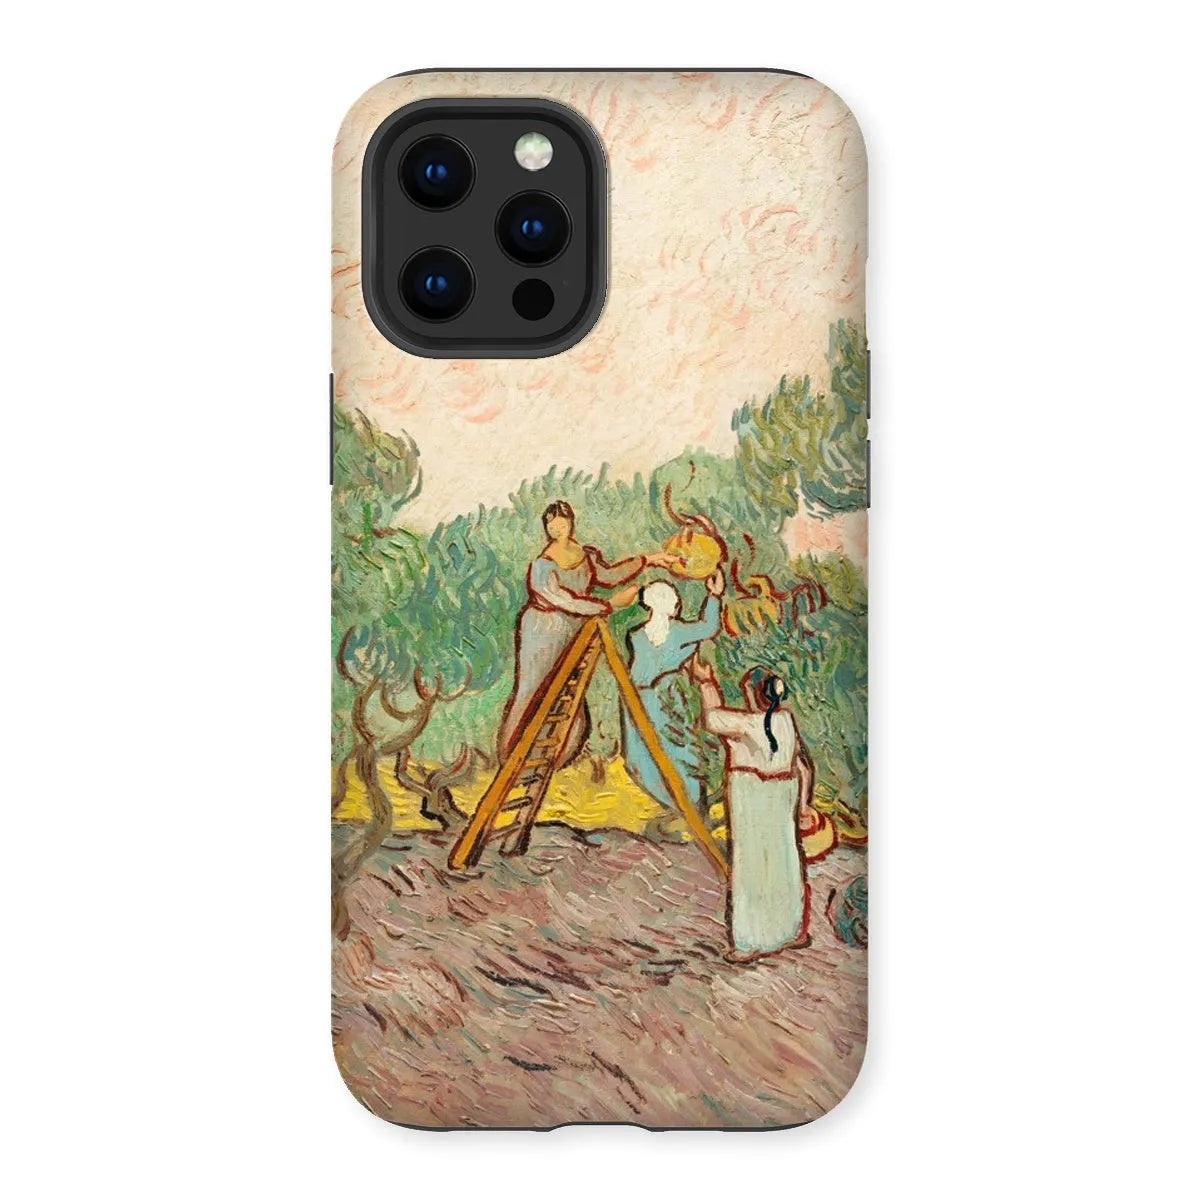 Women Picking Olives - Art Phone Case - Vincent Van Gogh - Iphone 12 Pro Max / Matte - Mobile Phone Cases - Aesthetic